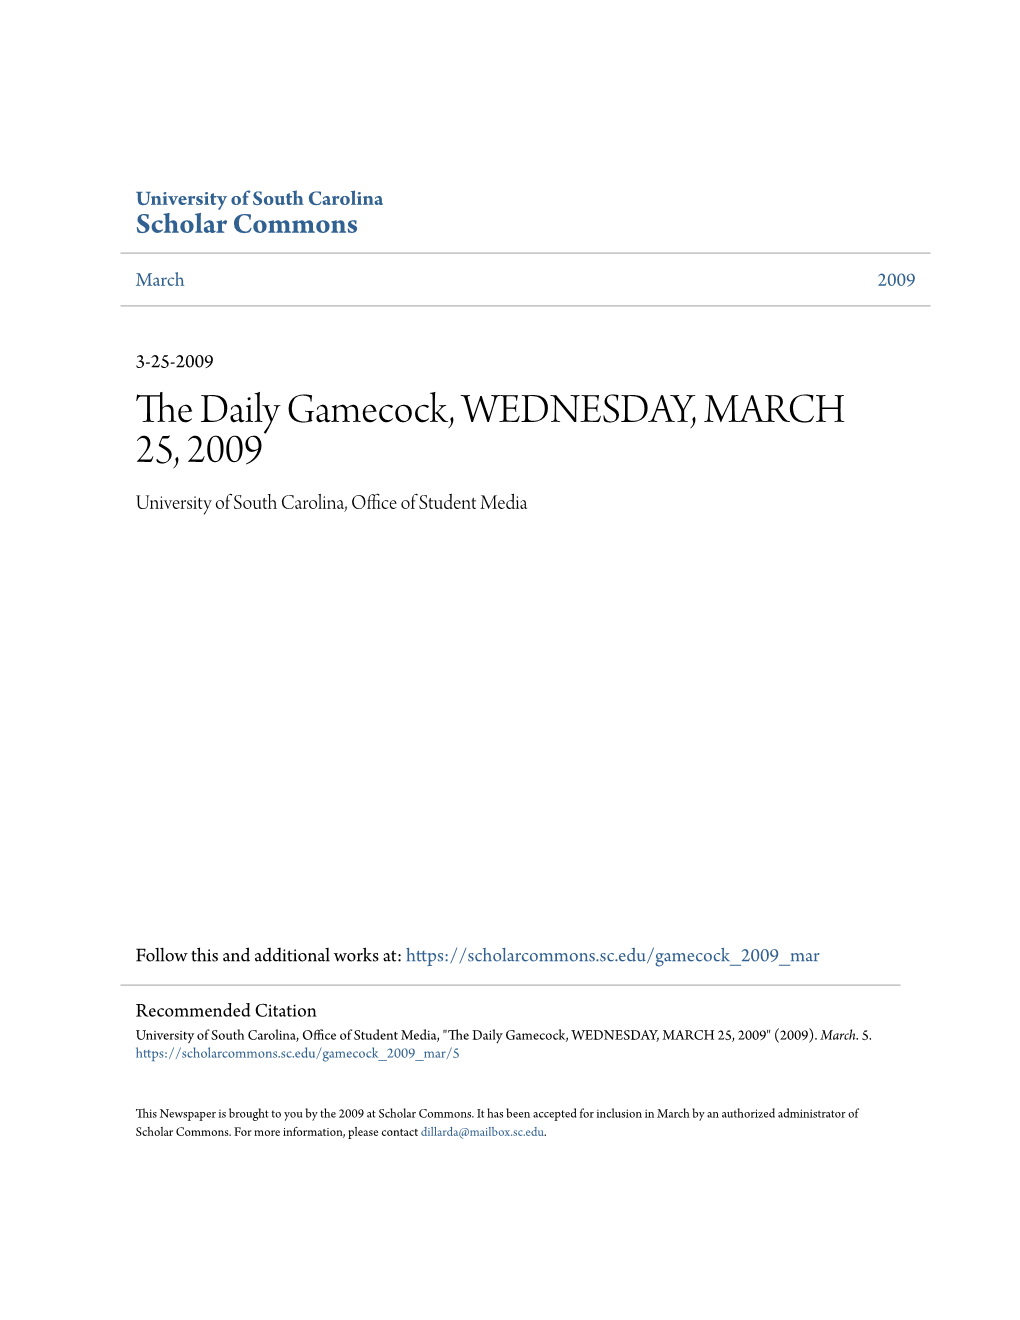 The Daily Gamecock, WEDNESDAY, MARCH 25, 2009